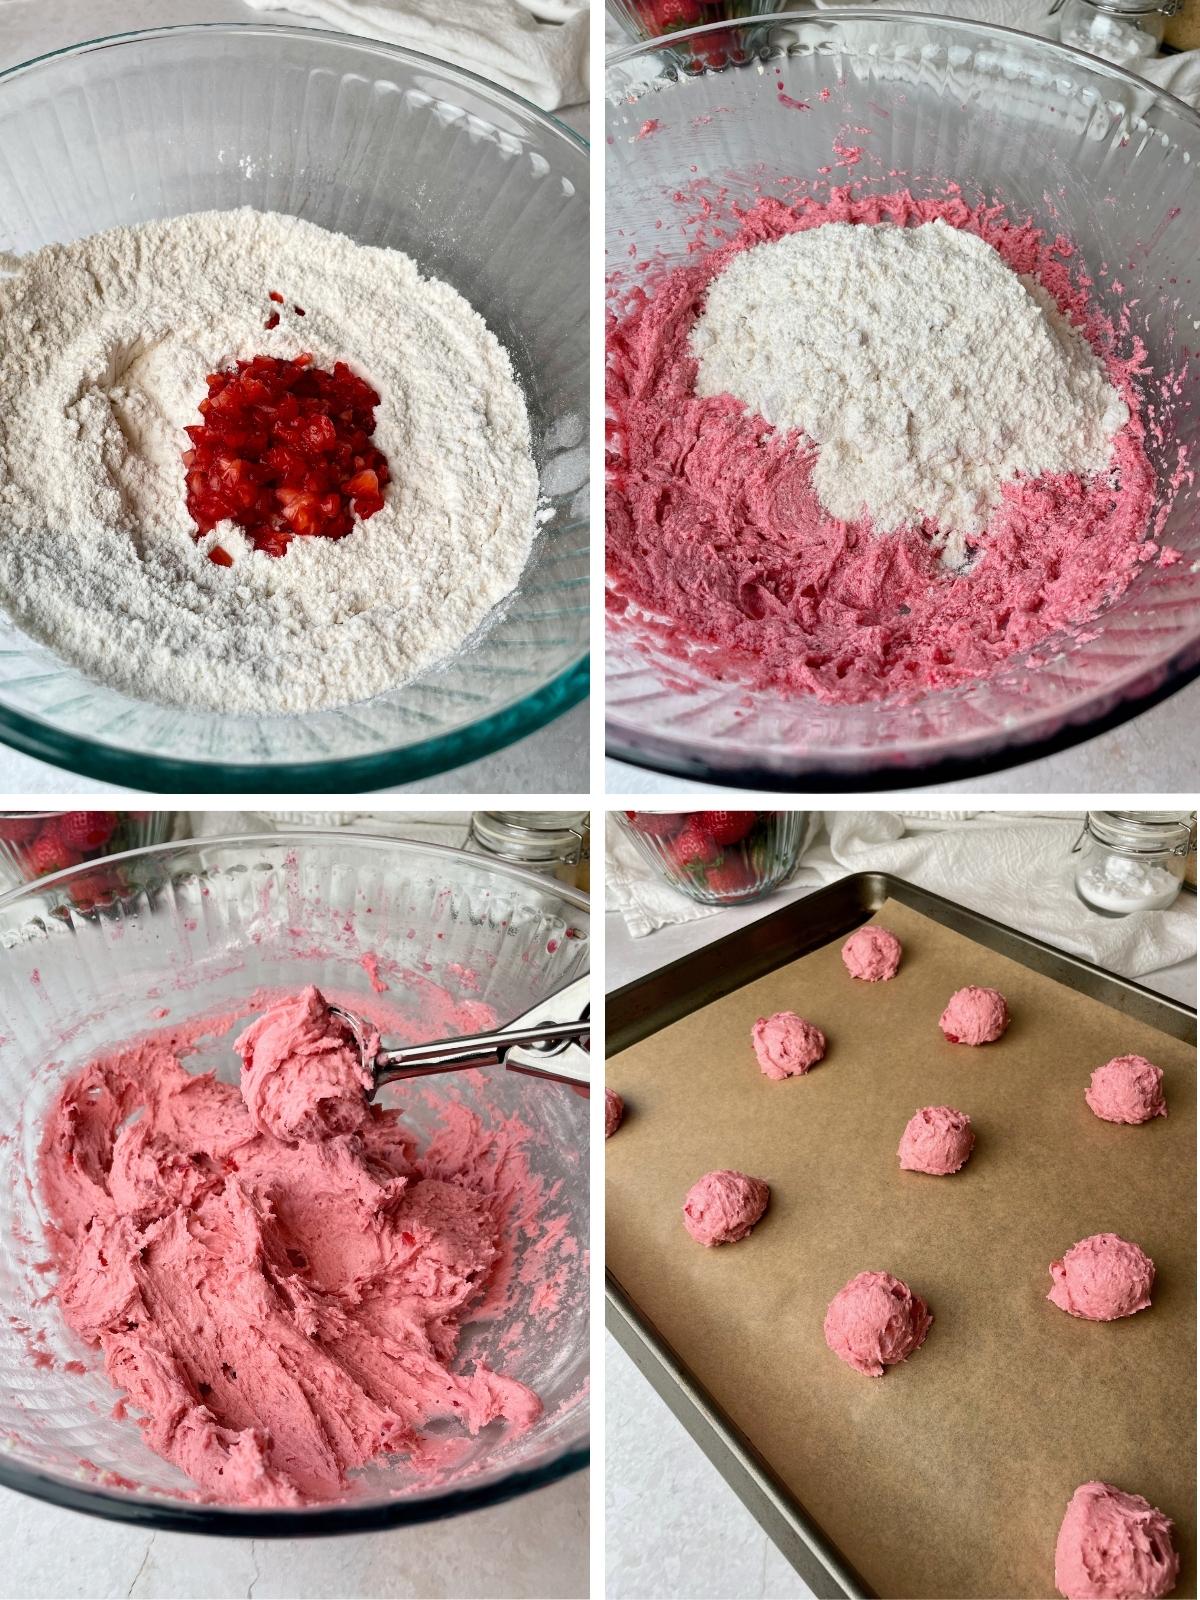 Second set of process steps for strawberry cookies.